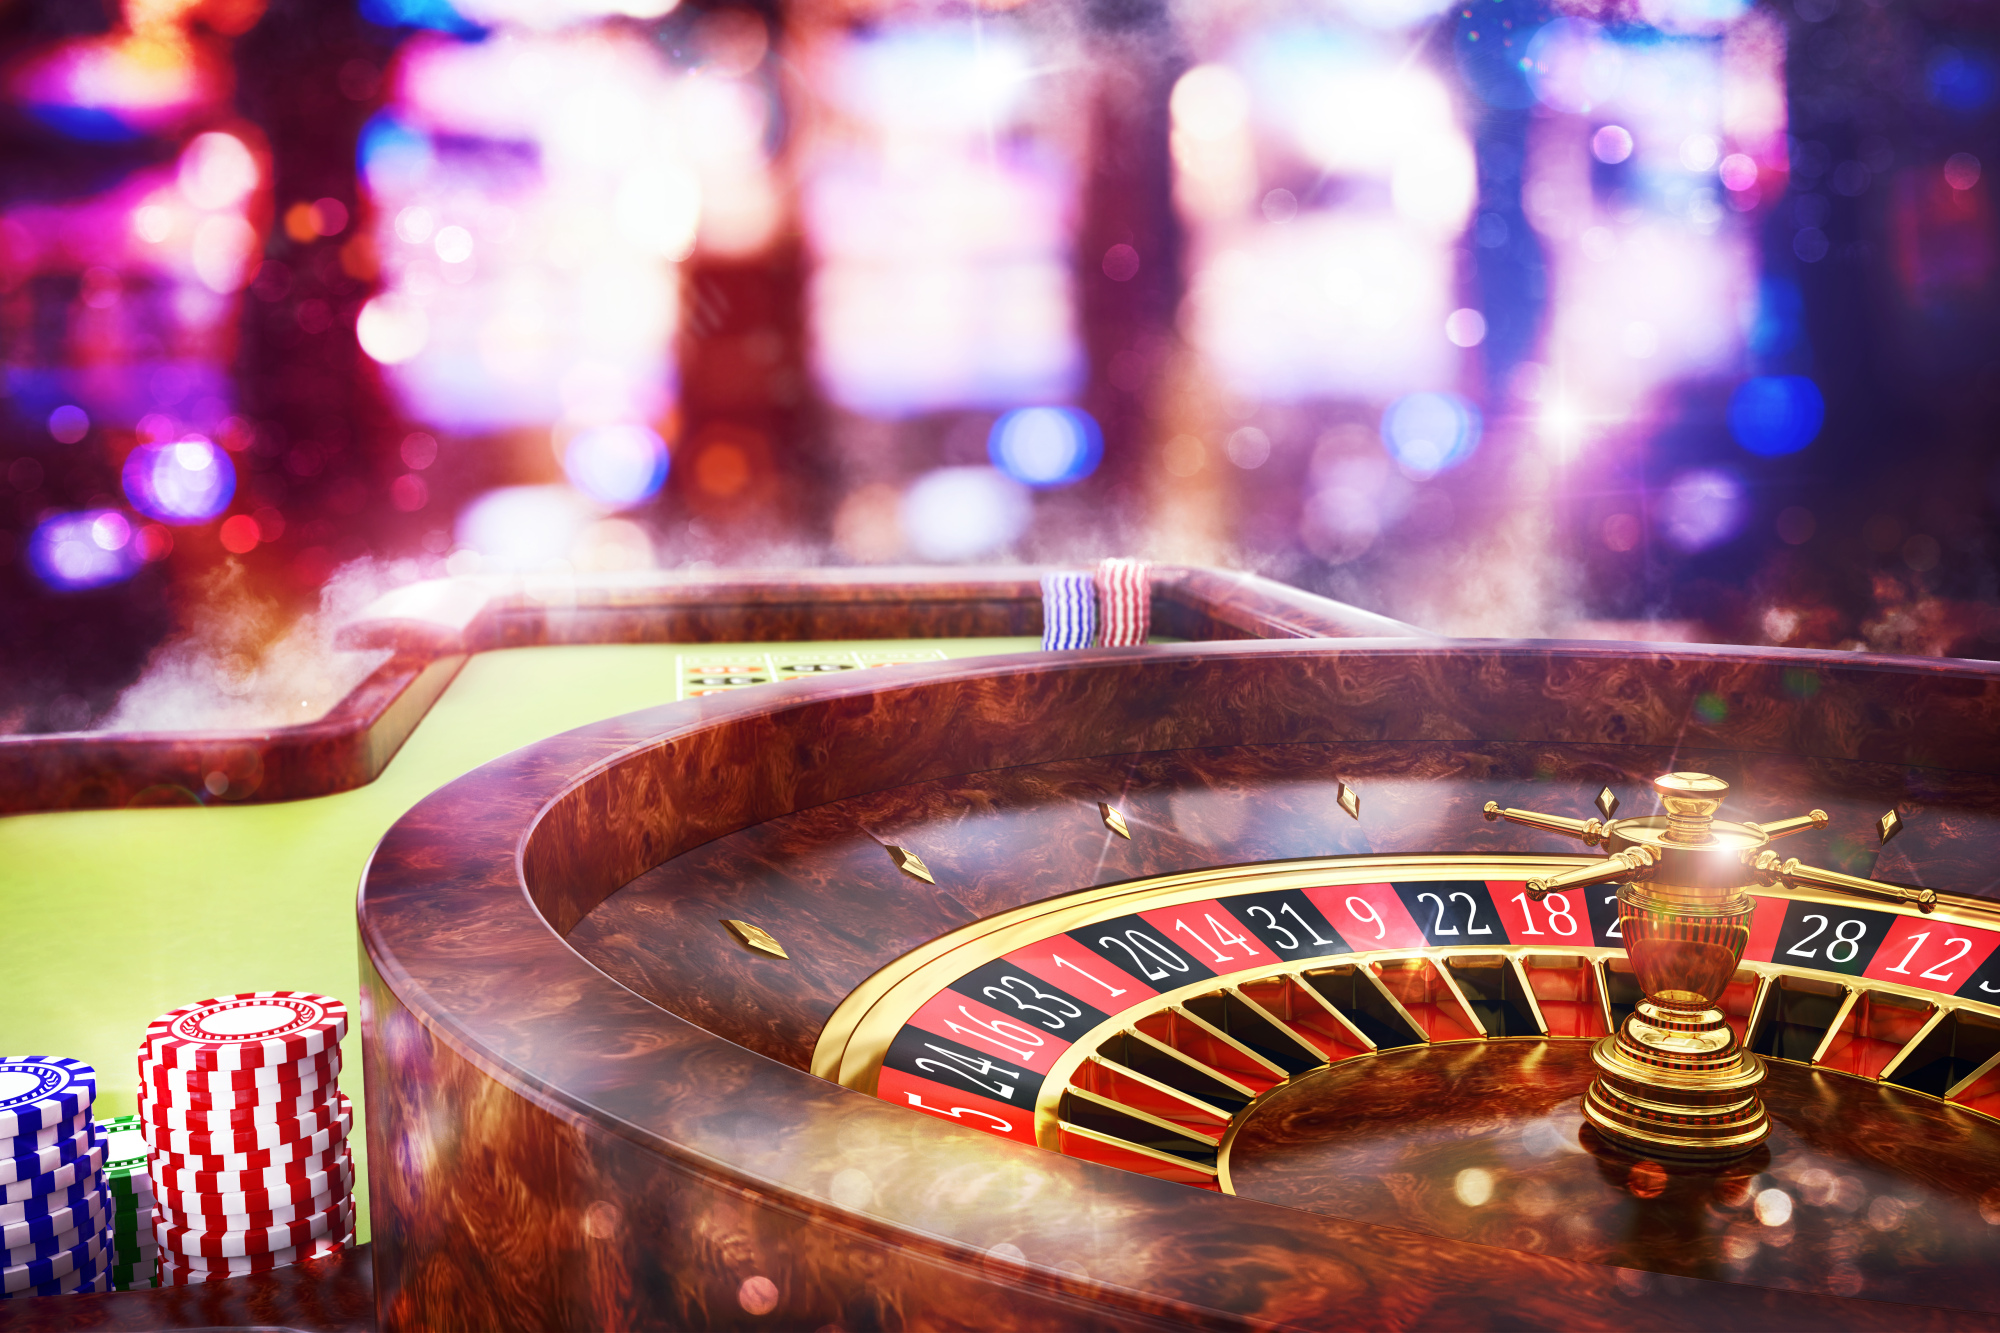 The Principal benefit of playing online casino games